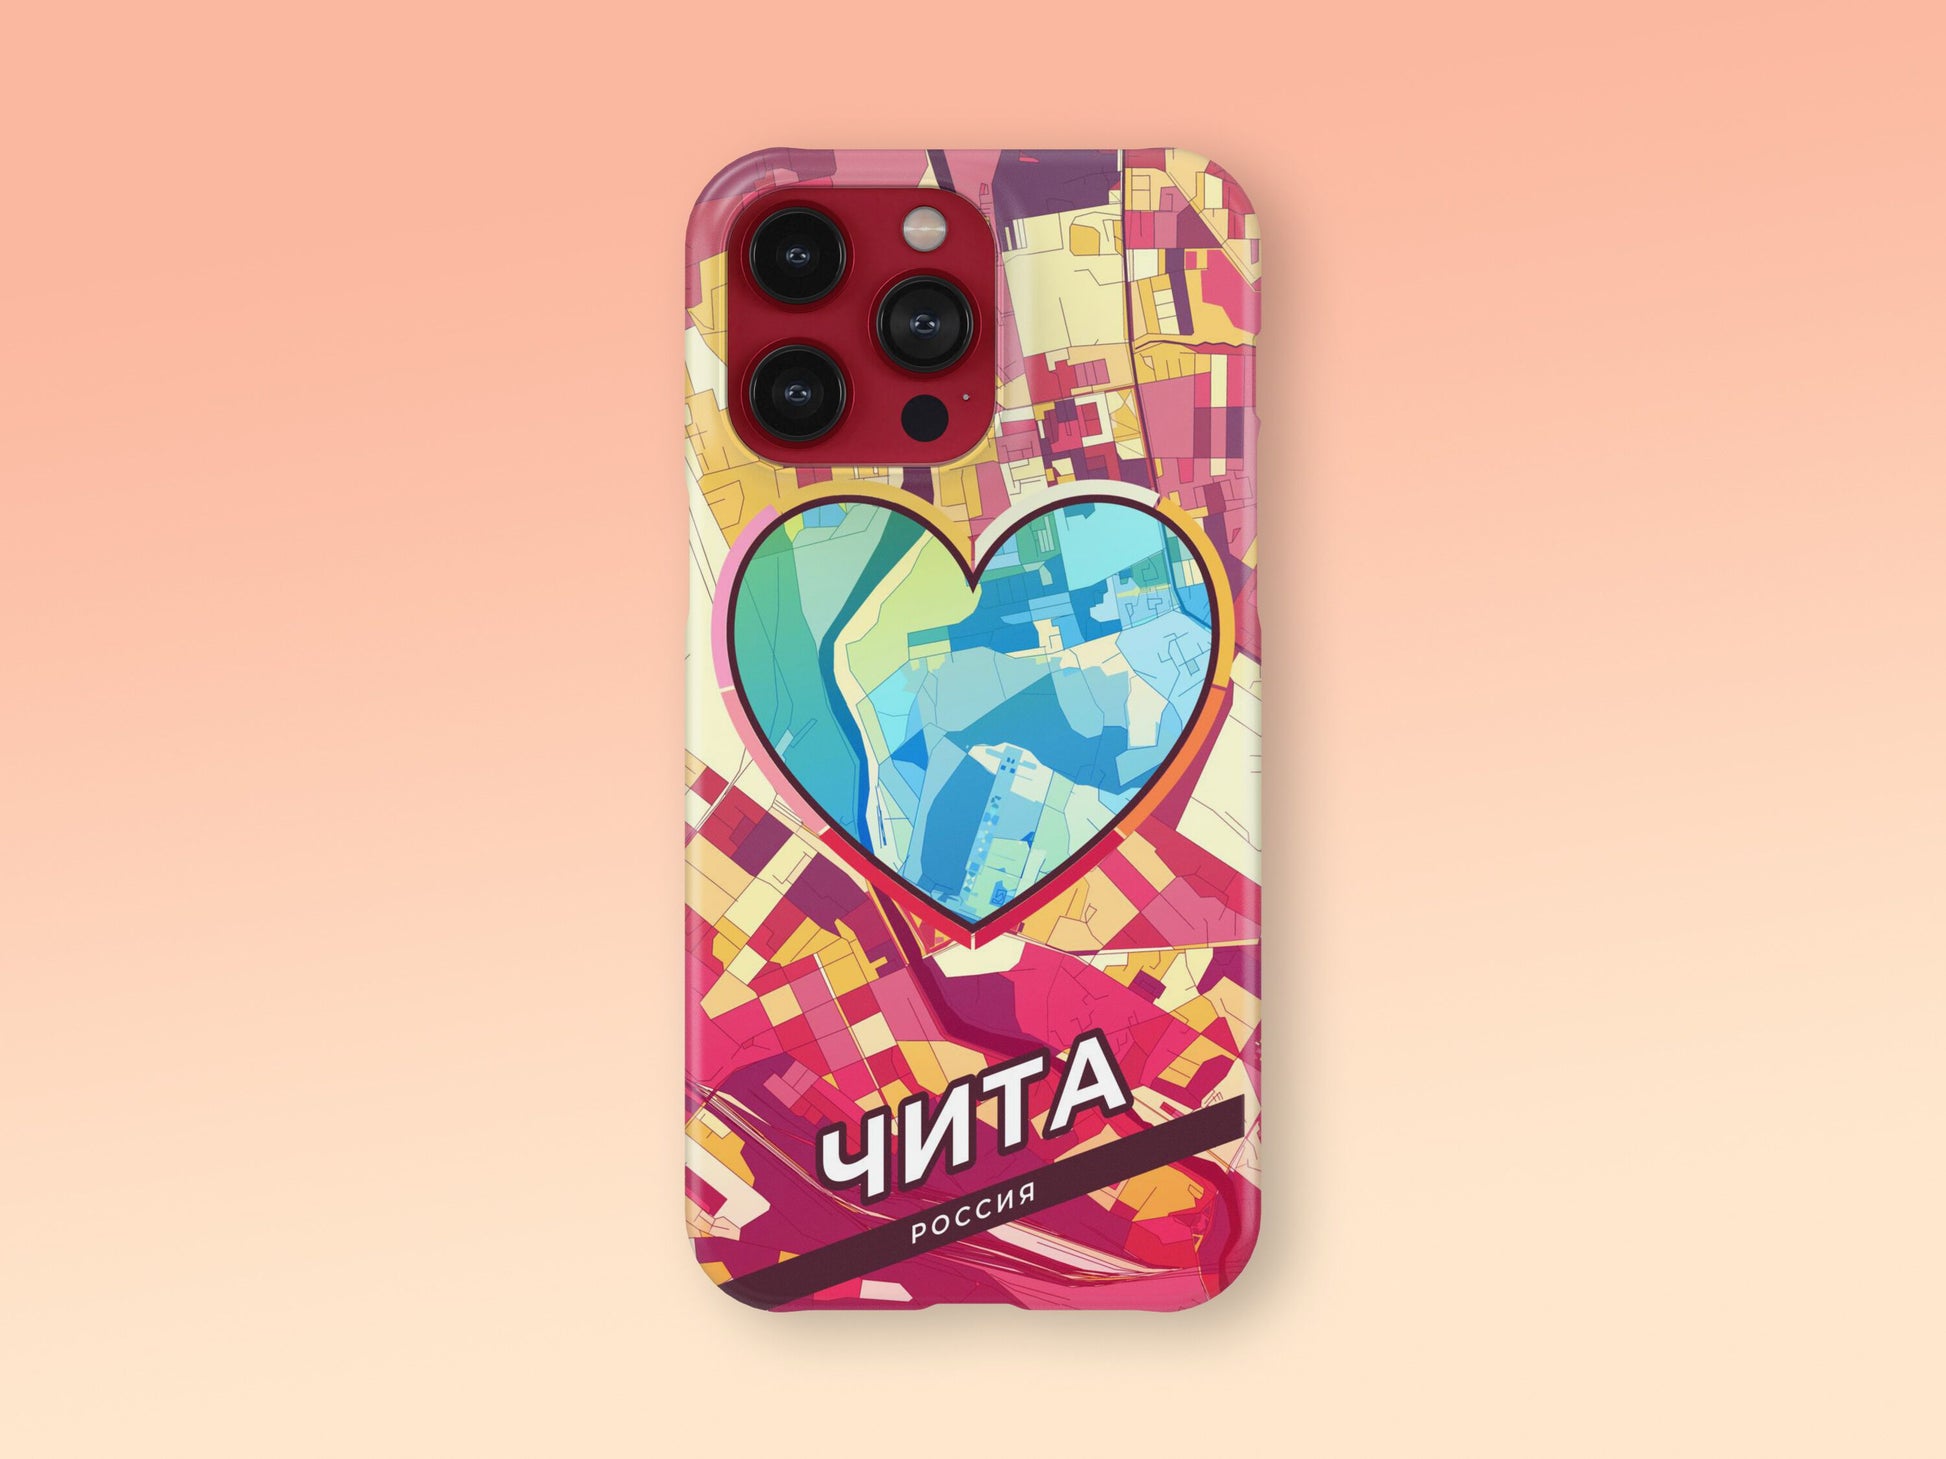 Chita Russia slim phone case with colorful icon. Birthday, wedding or housewarming gift. Couple match cases. 2